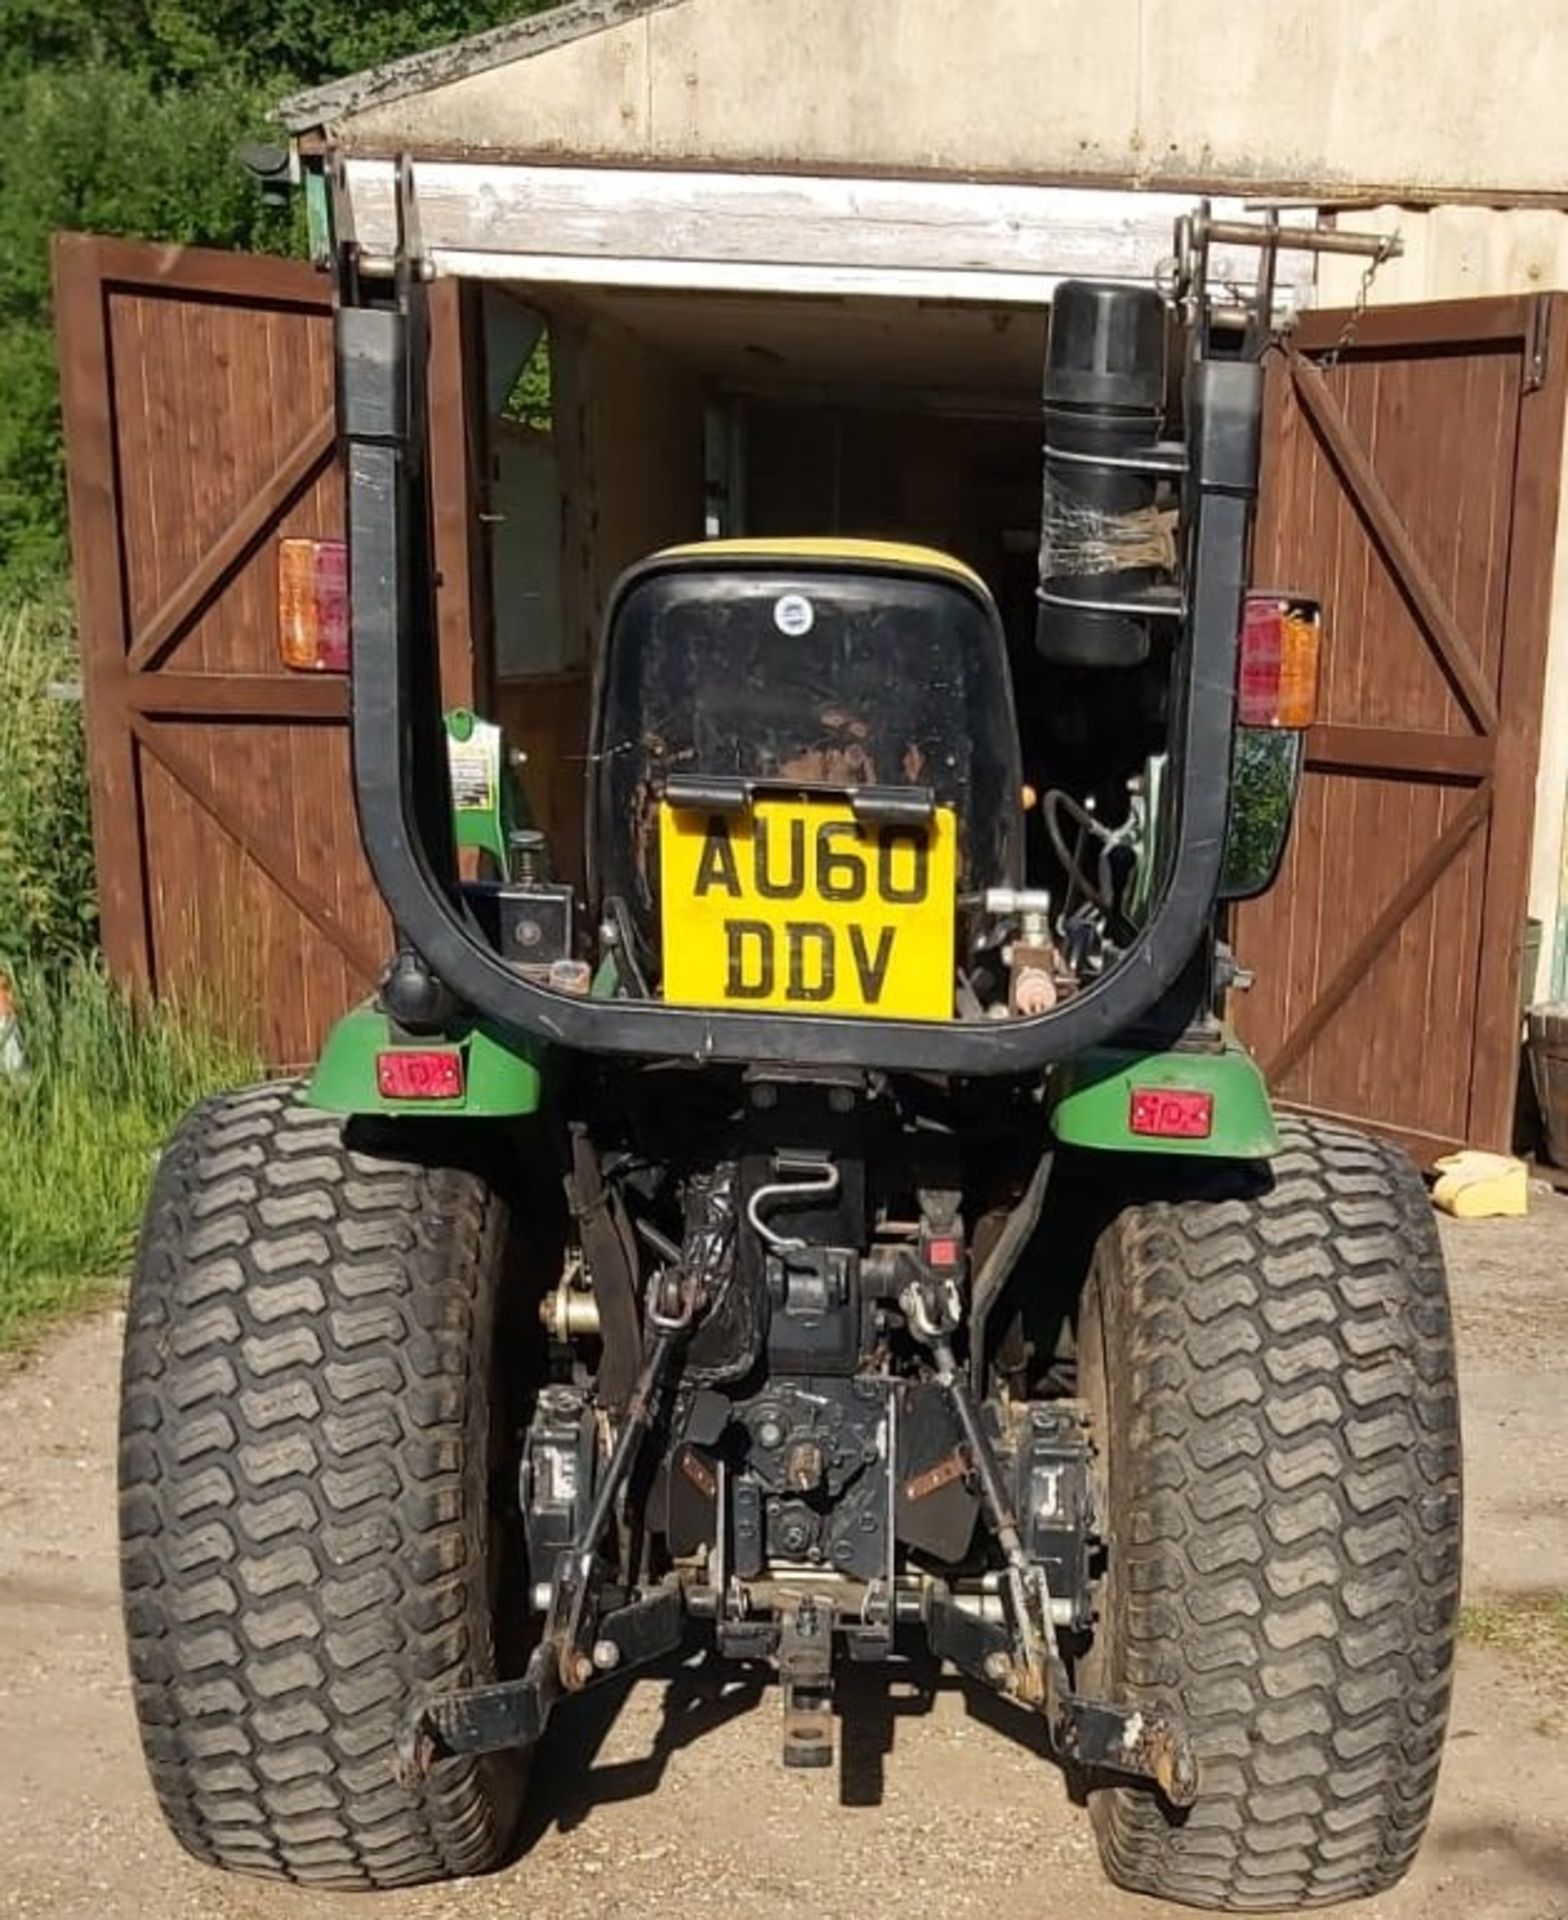 John Deere 2520 Compact Tractor, AU60 DDV, First Registered 6th January 2011, 770 Hours with Spare - Image 10 of 10